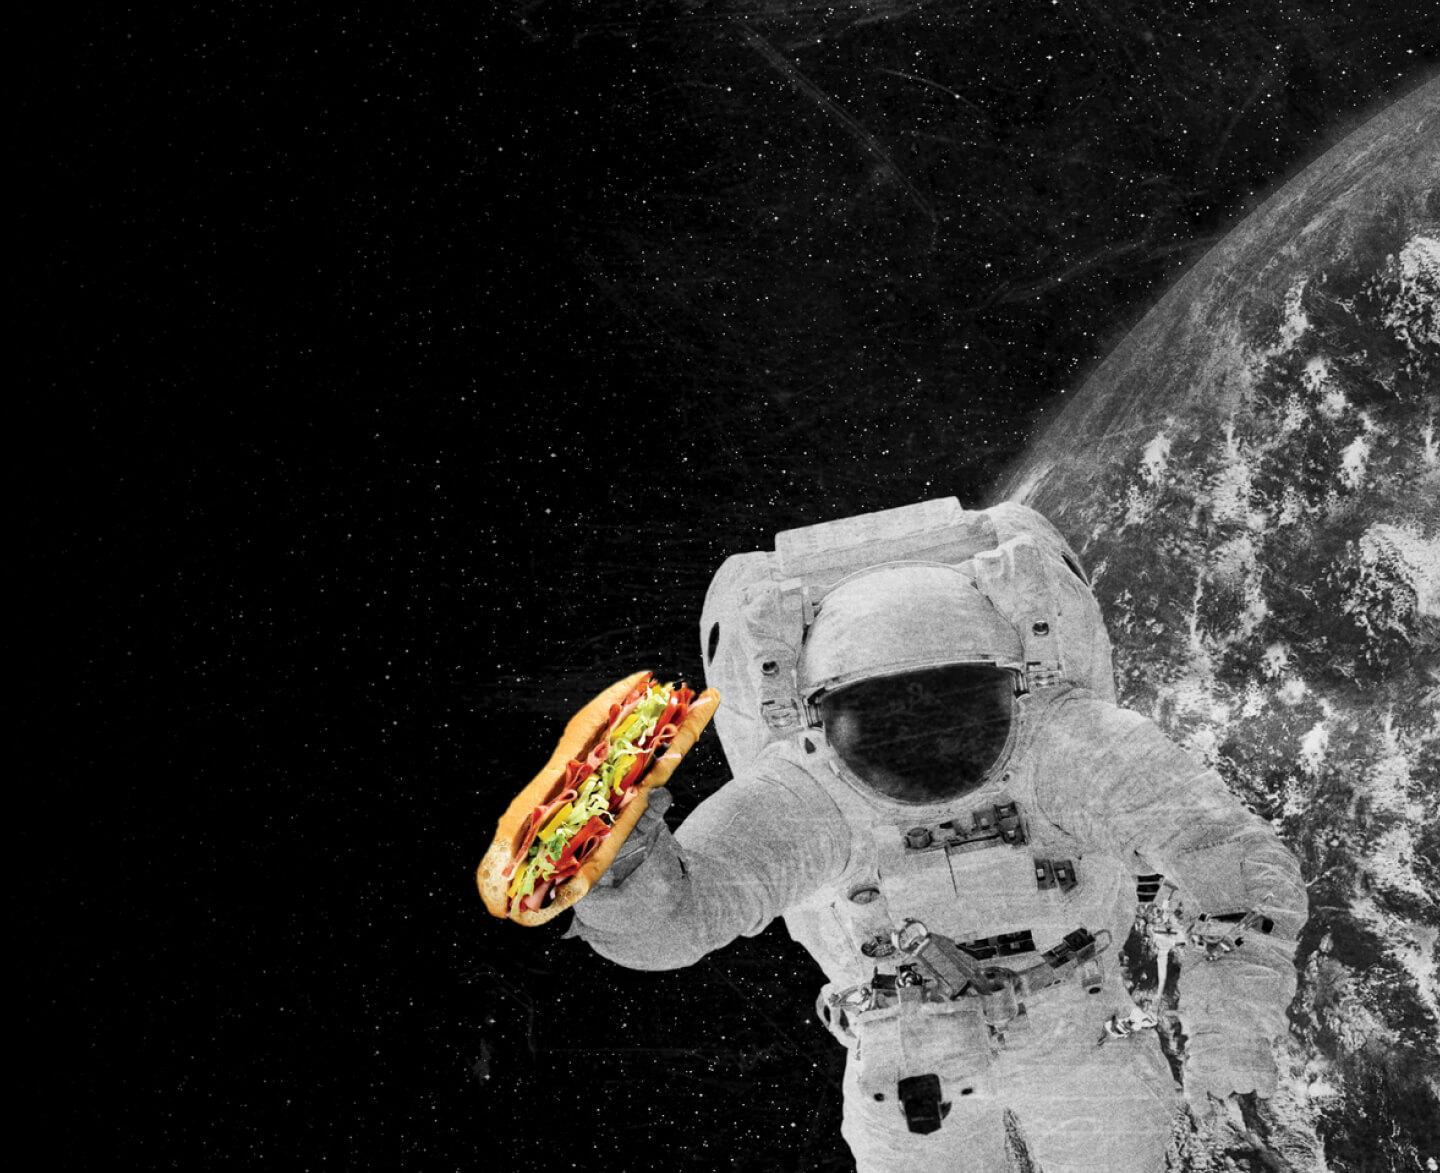 An astronaut in space eating a Quiznos sub